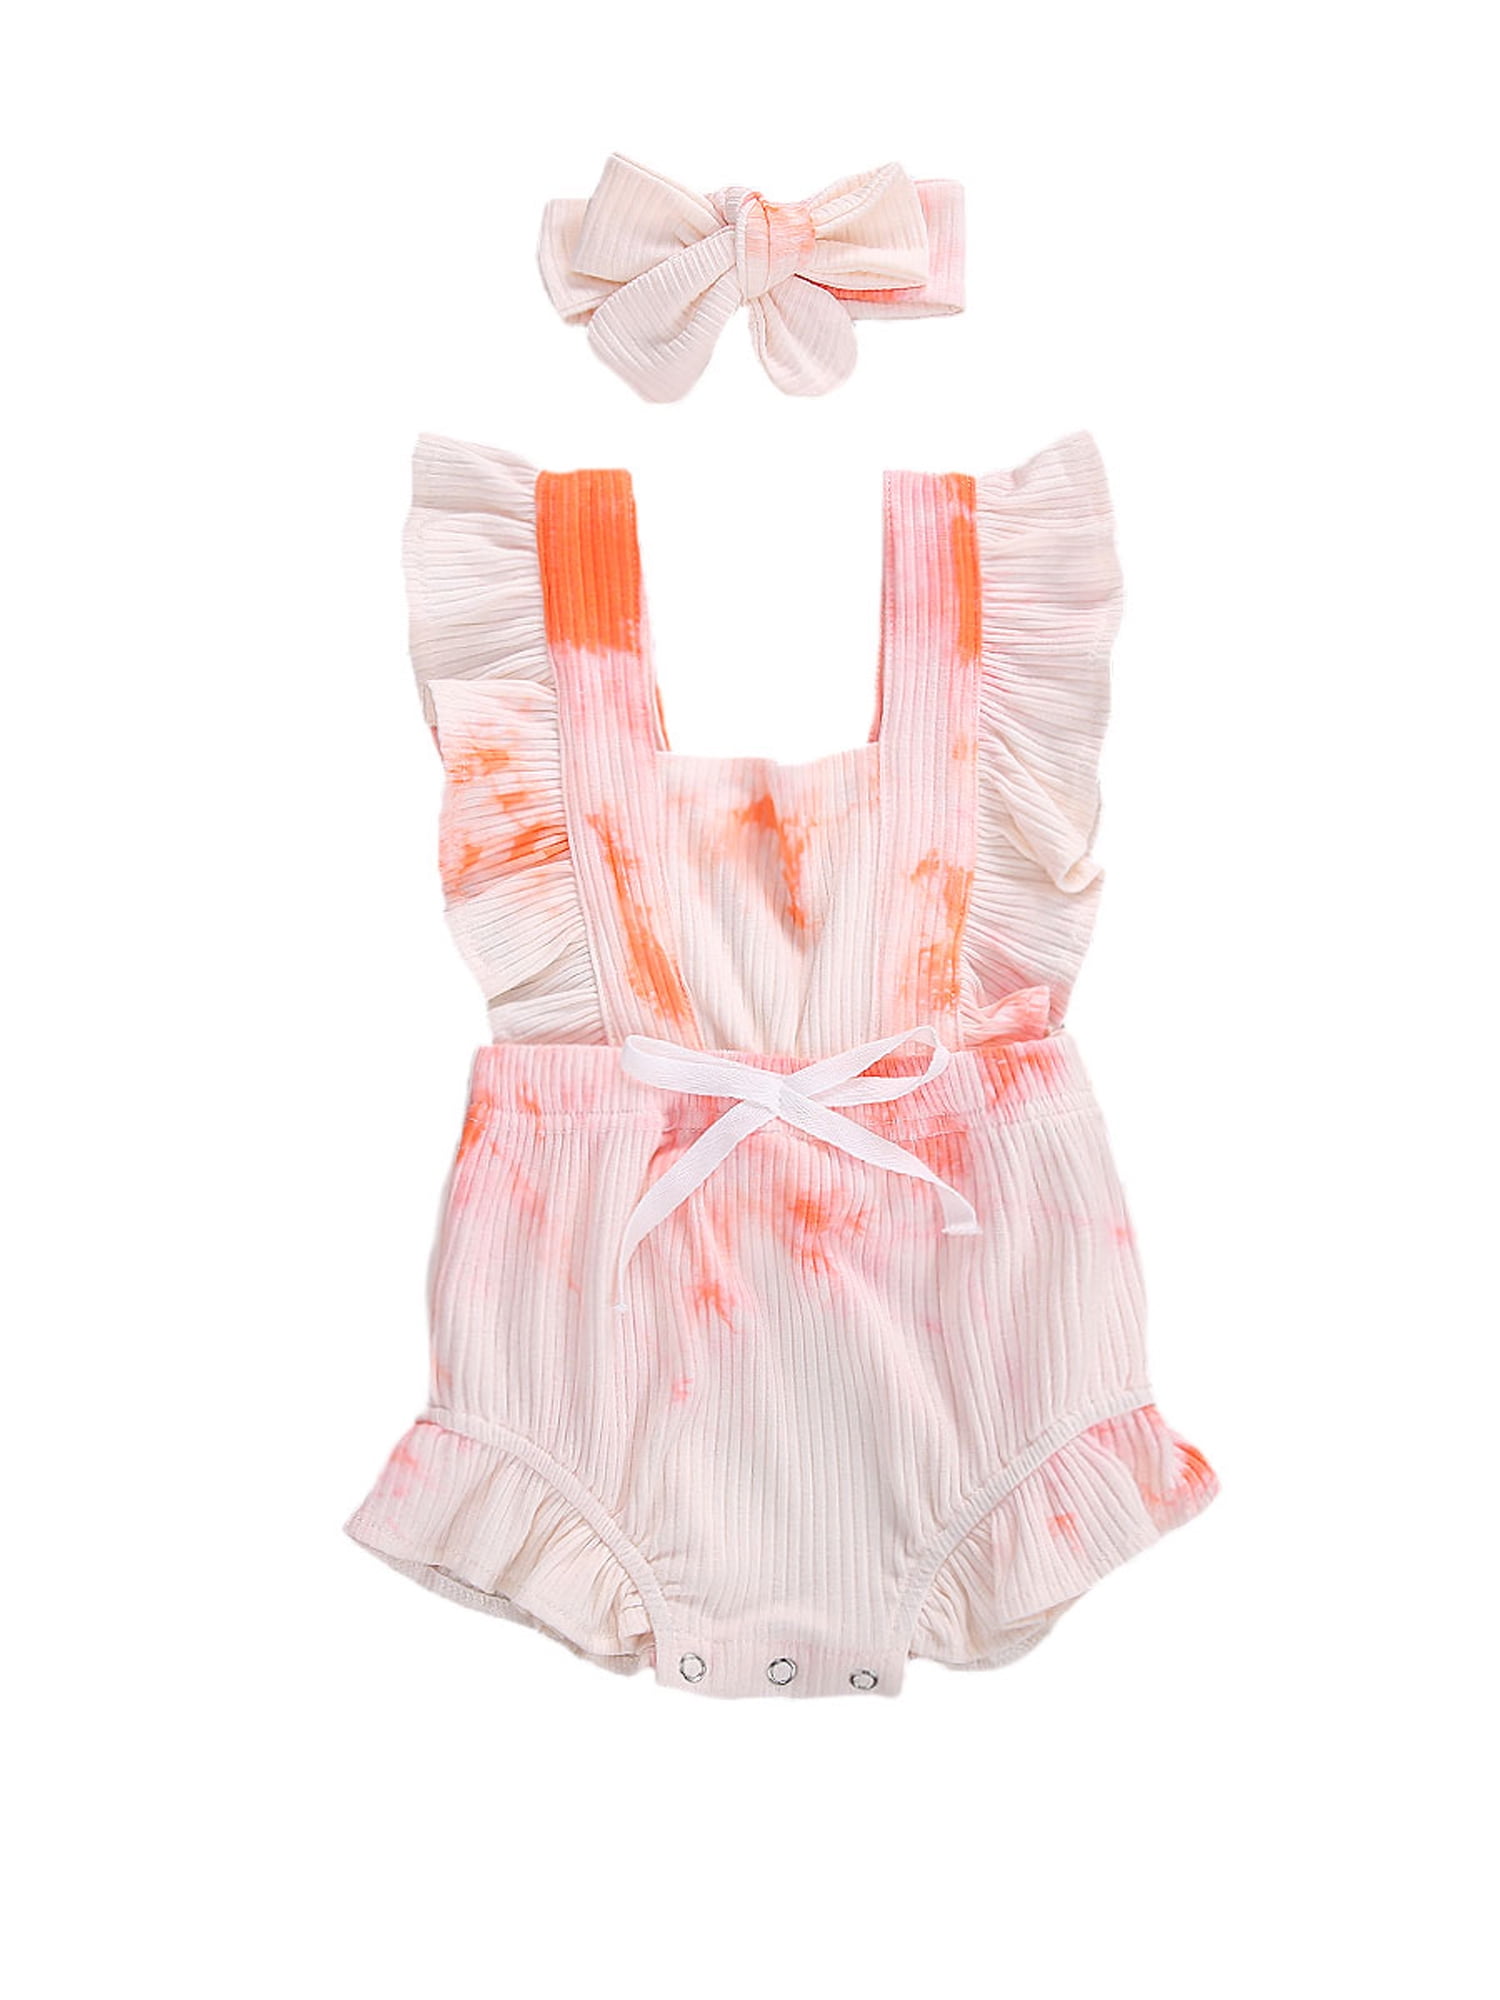 Details about   Carter's Baby Girl Ruffles Sleeveless Romper Size 6months 